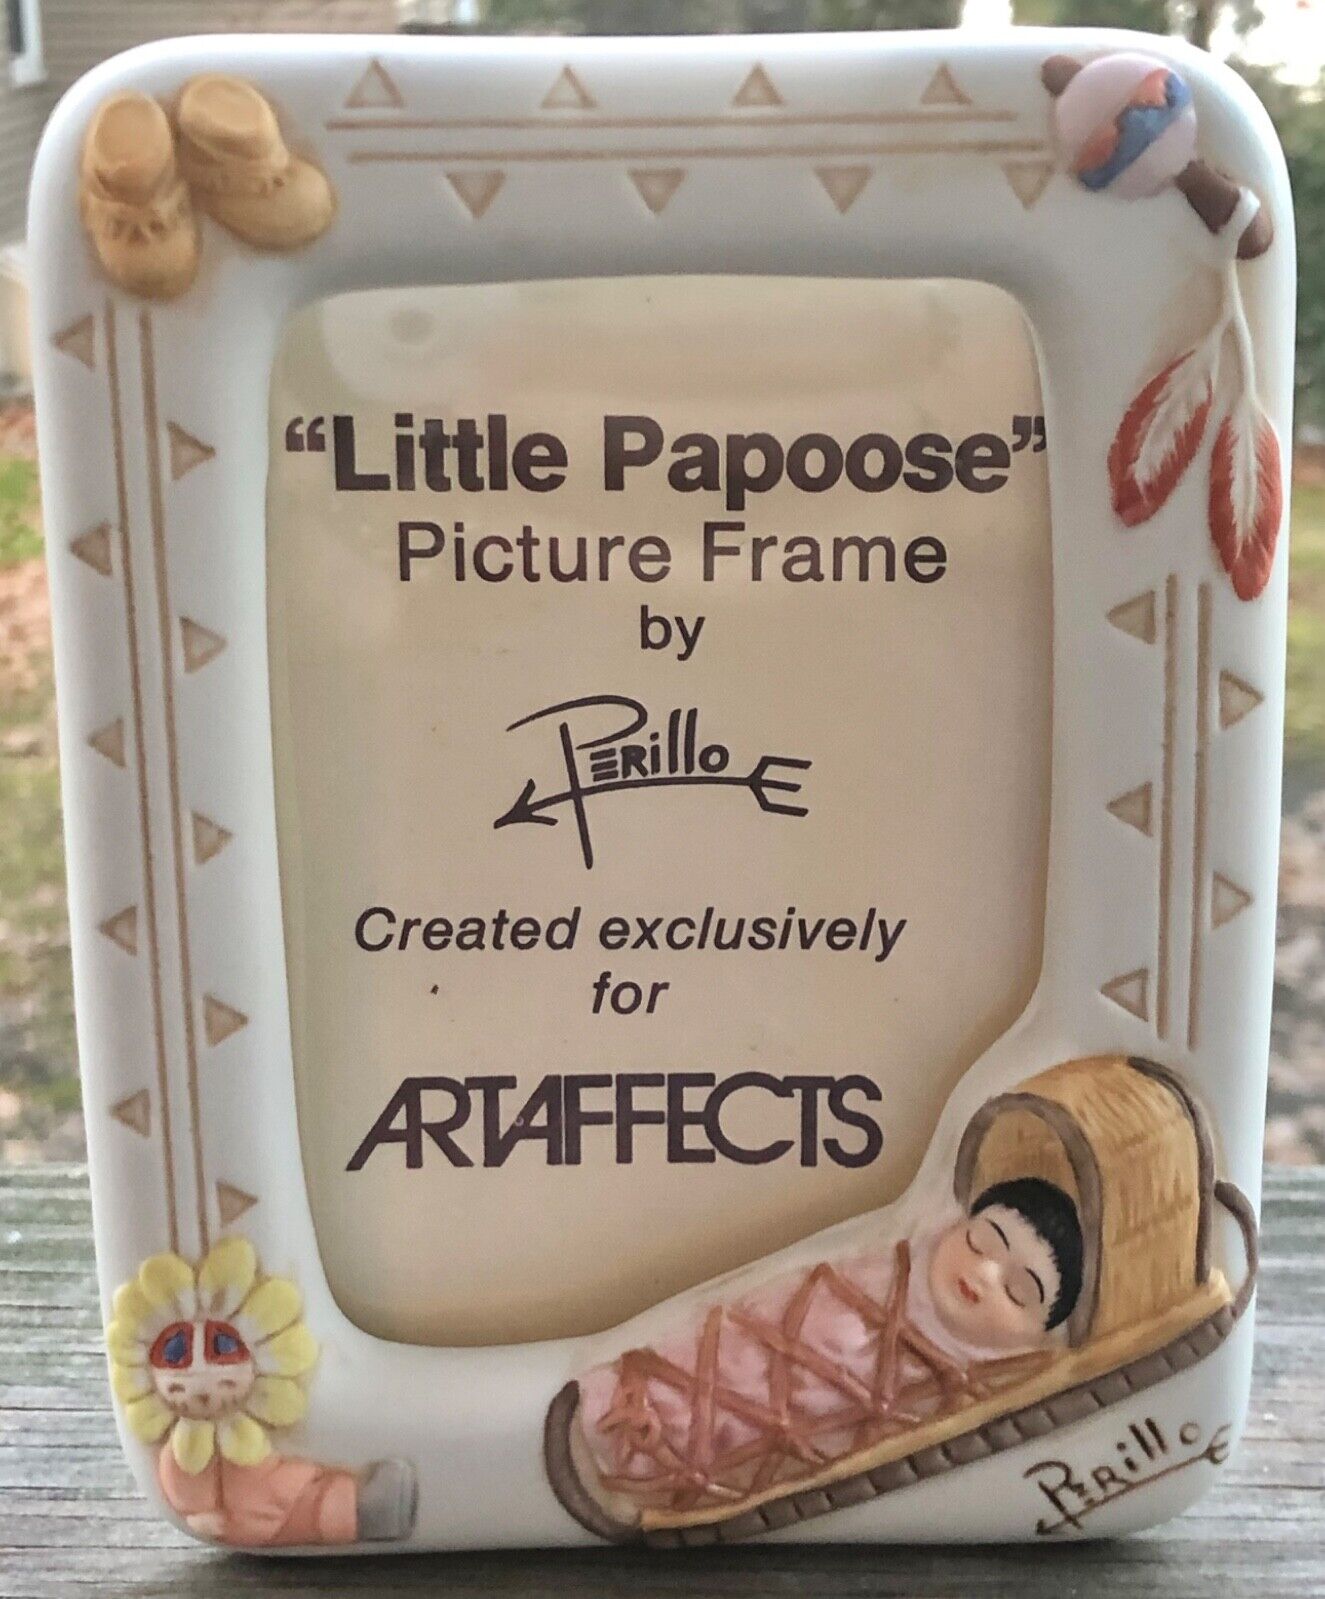 NIB Vintage Little Papoose Gregory Perillo Picture Frame